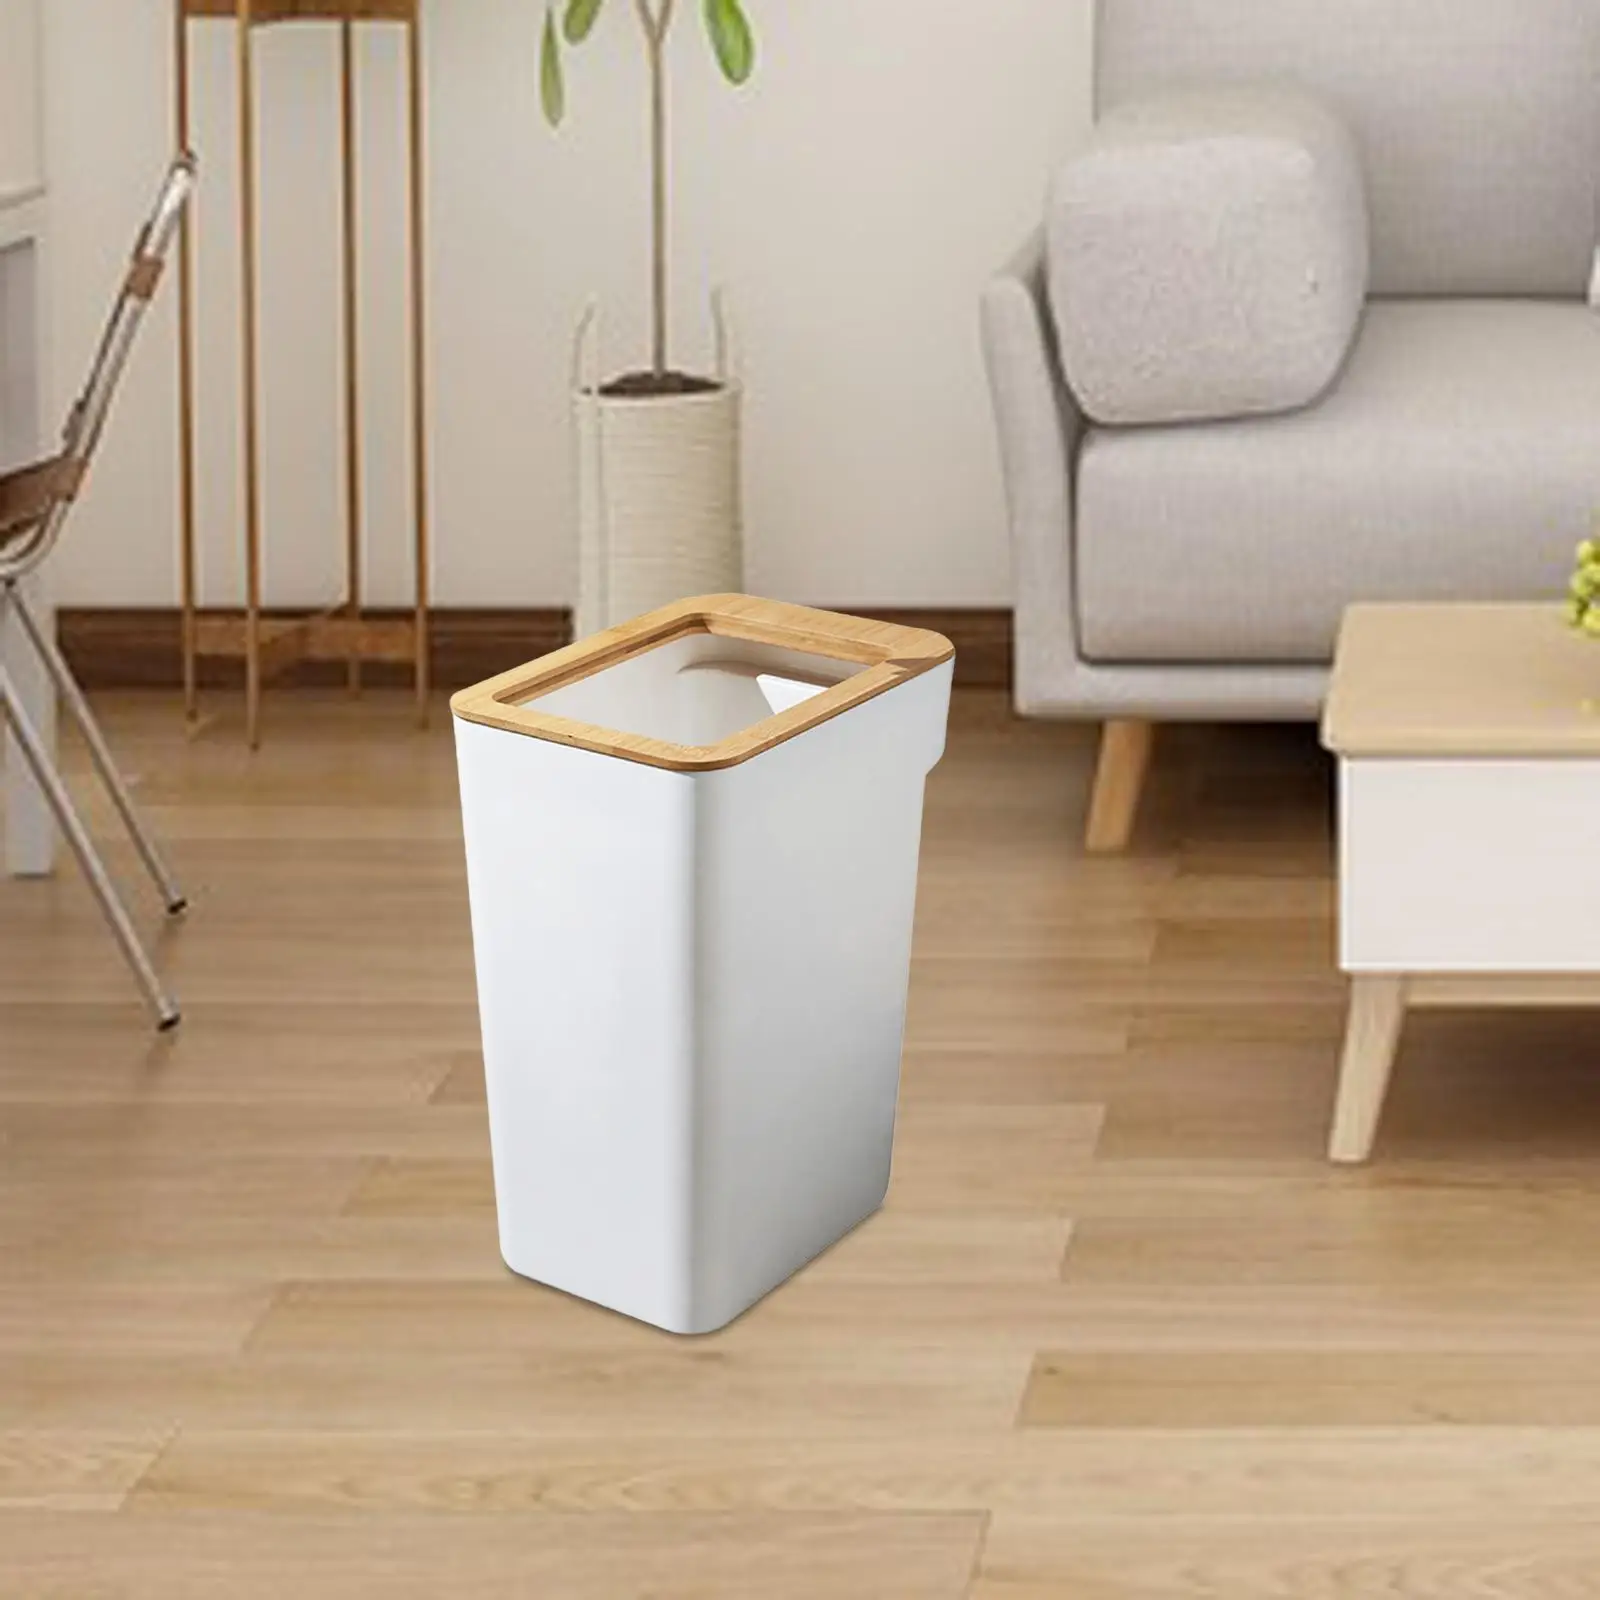 Modern Trash Can Garbage Container Without Lid Waste Bins Rubbish Can Trash Bin for Washroom Kitchen Home Office Bathroom